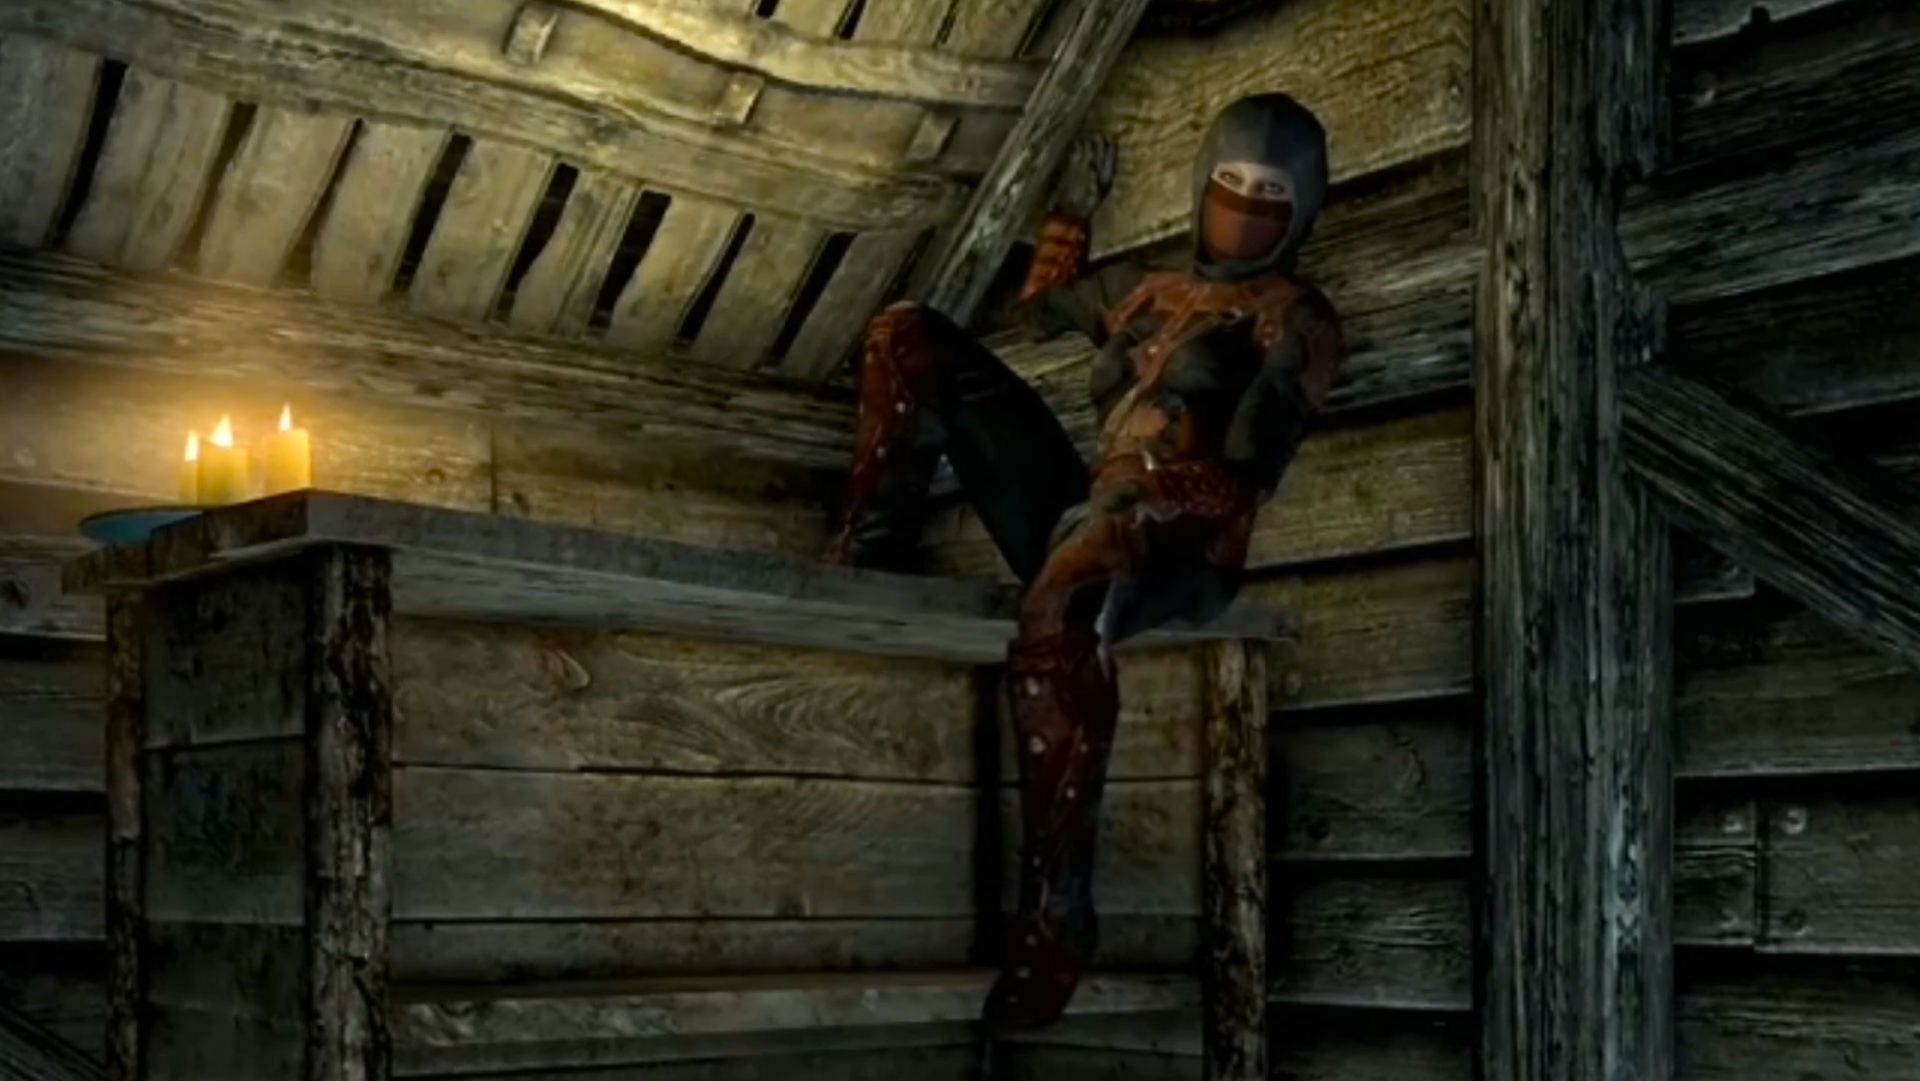 If stealth and murder are your goal, try the Dark Brotherhood in Skyrim!